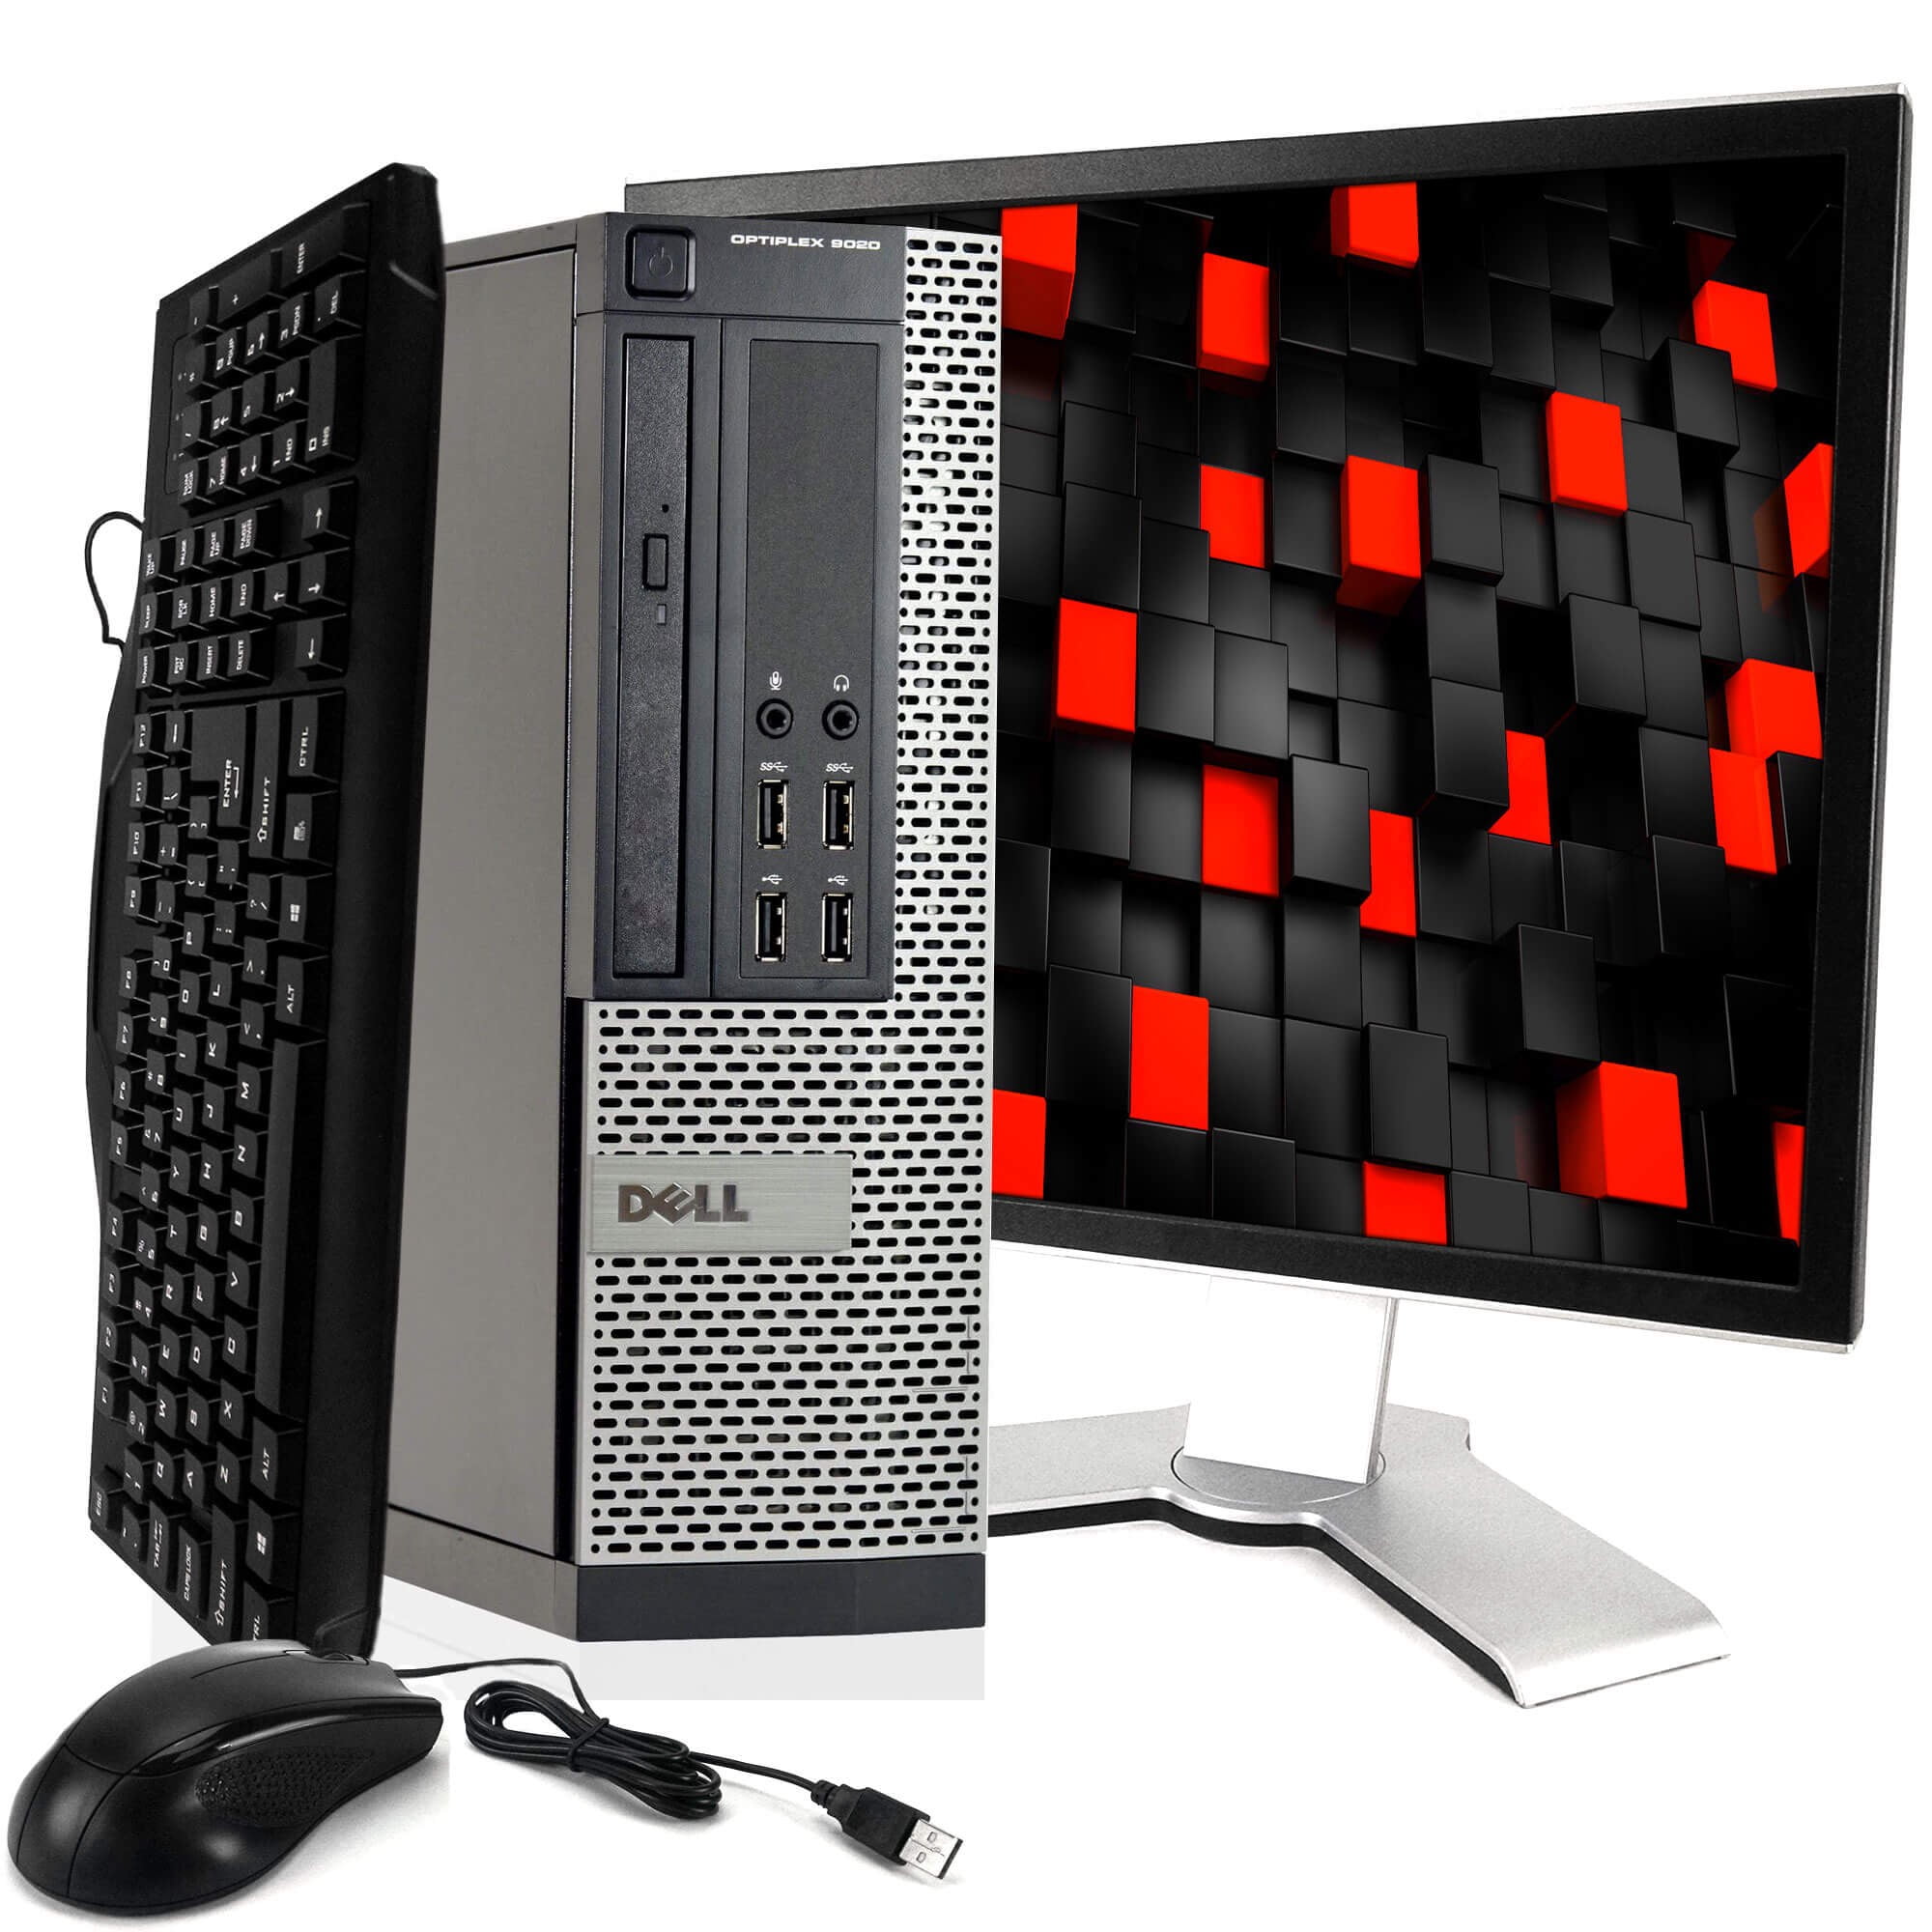 Dell Optiplex 9020 Desktop Computer Intel Core I5 16GB 1TB HDD Windows 10 Includes 22in LCD Monitor, Mouse and Keyboard - Walmart.com